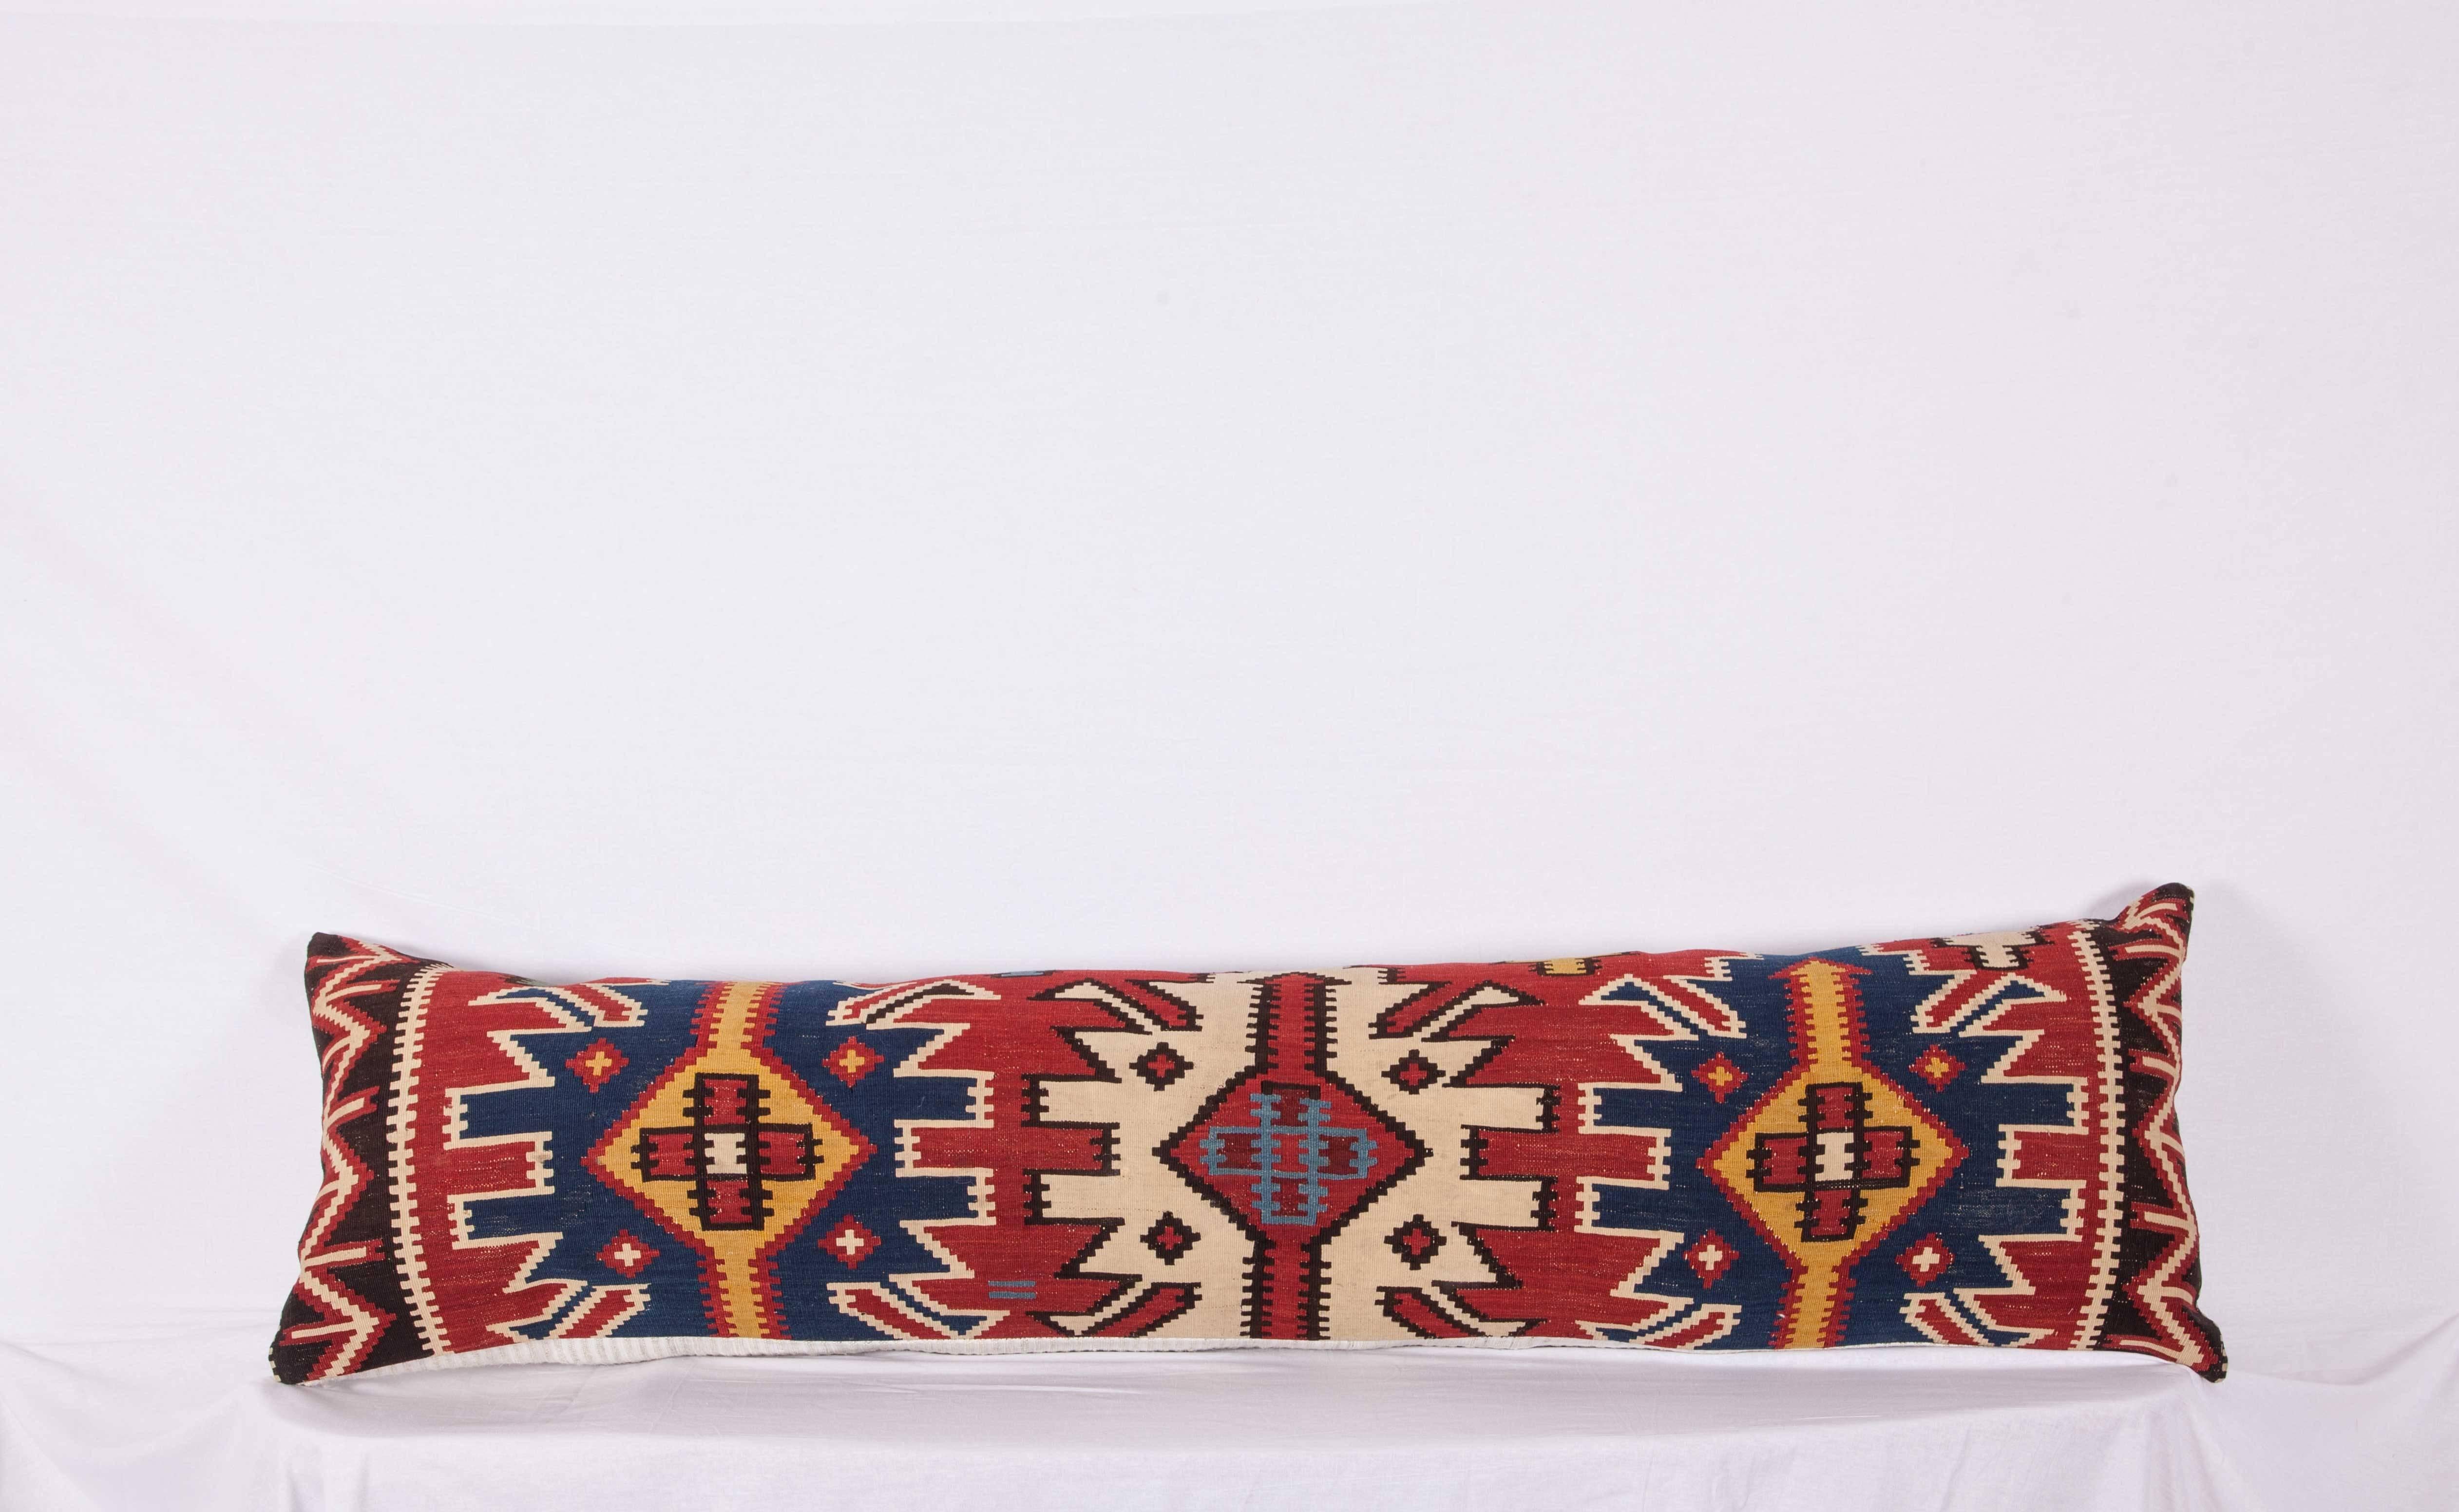 This very pillow is a very long one measure: 43 x 159 cm / 16.93 x 62.6 inches and made out of a great 19th Century Caucasian Kuba Kilim. It does not come with inserts but come with a bag made to the size and out of cotton to accommodate the